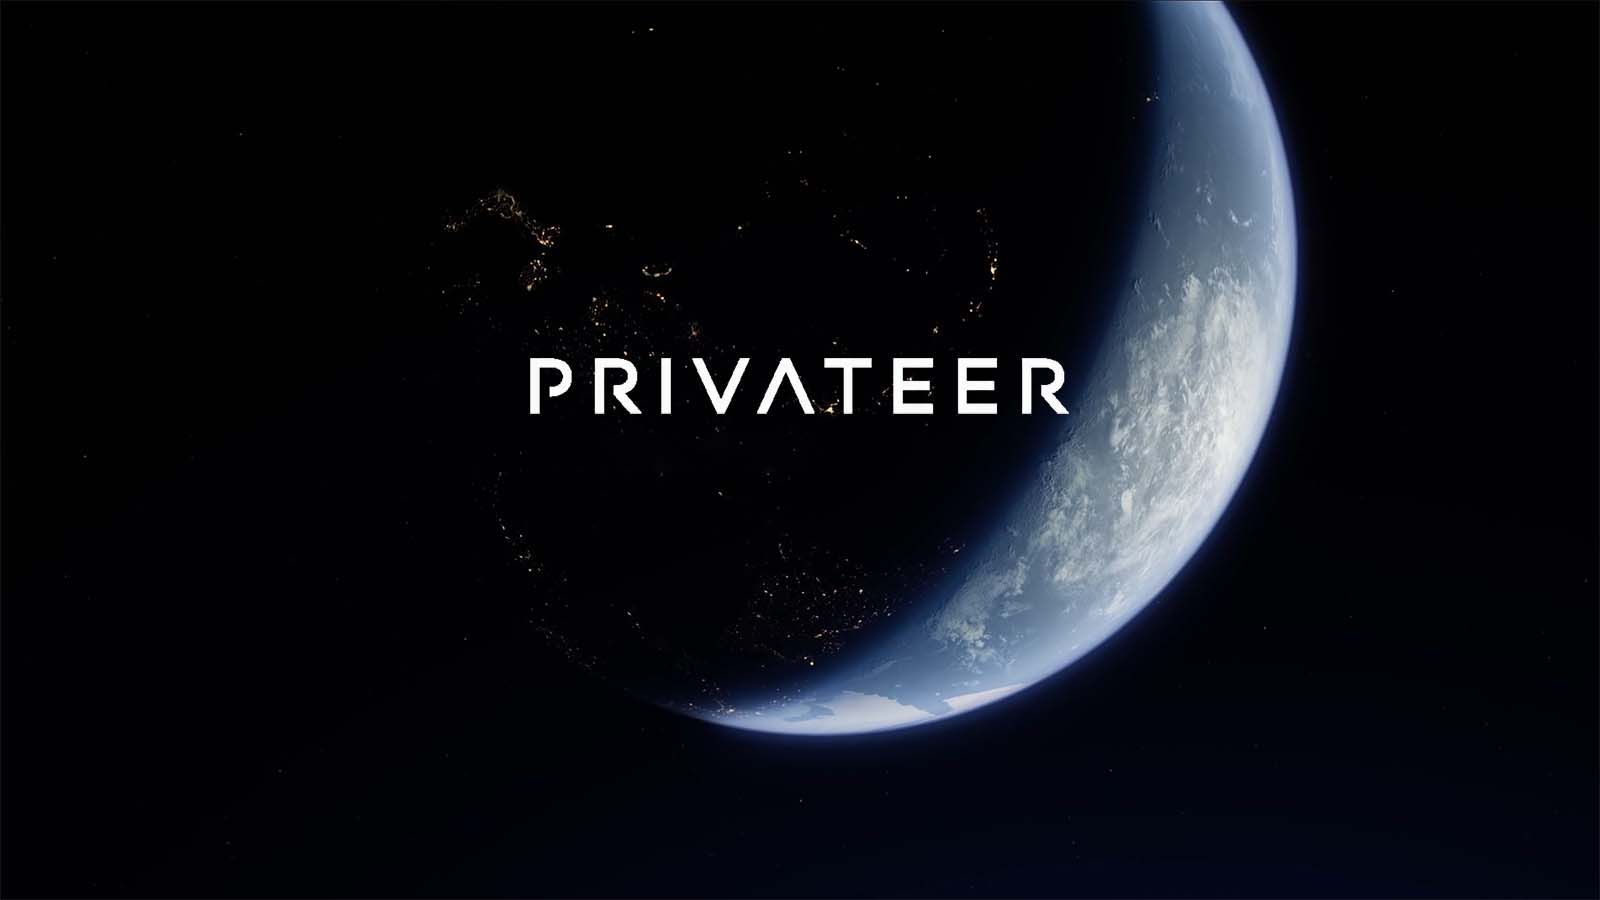 The Privateer Logo Against A Half-Lit Backdrop Of Earth From Orbit